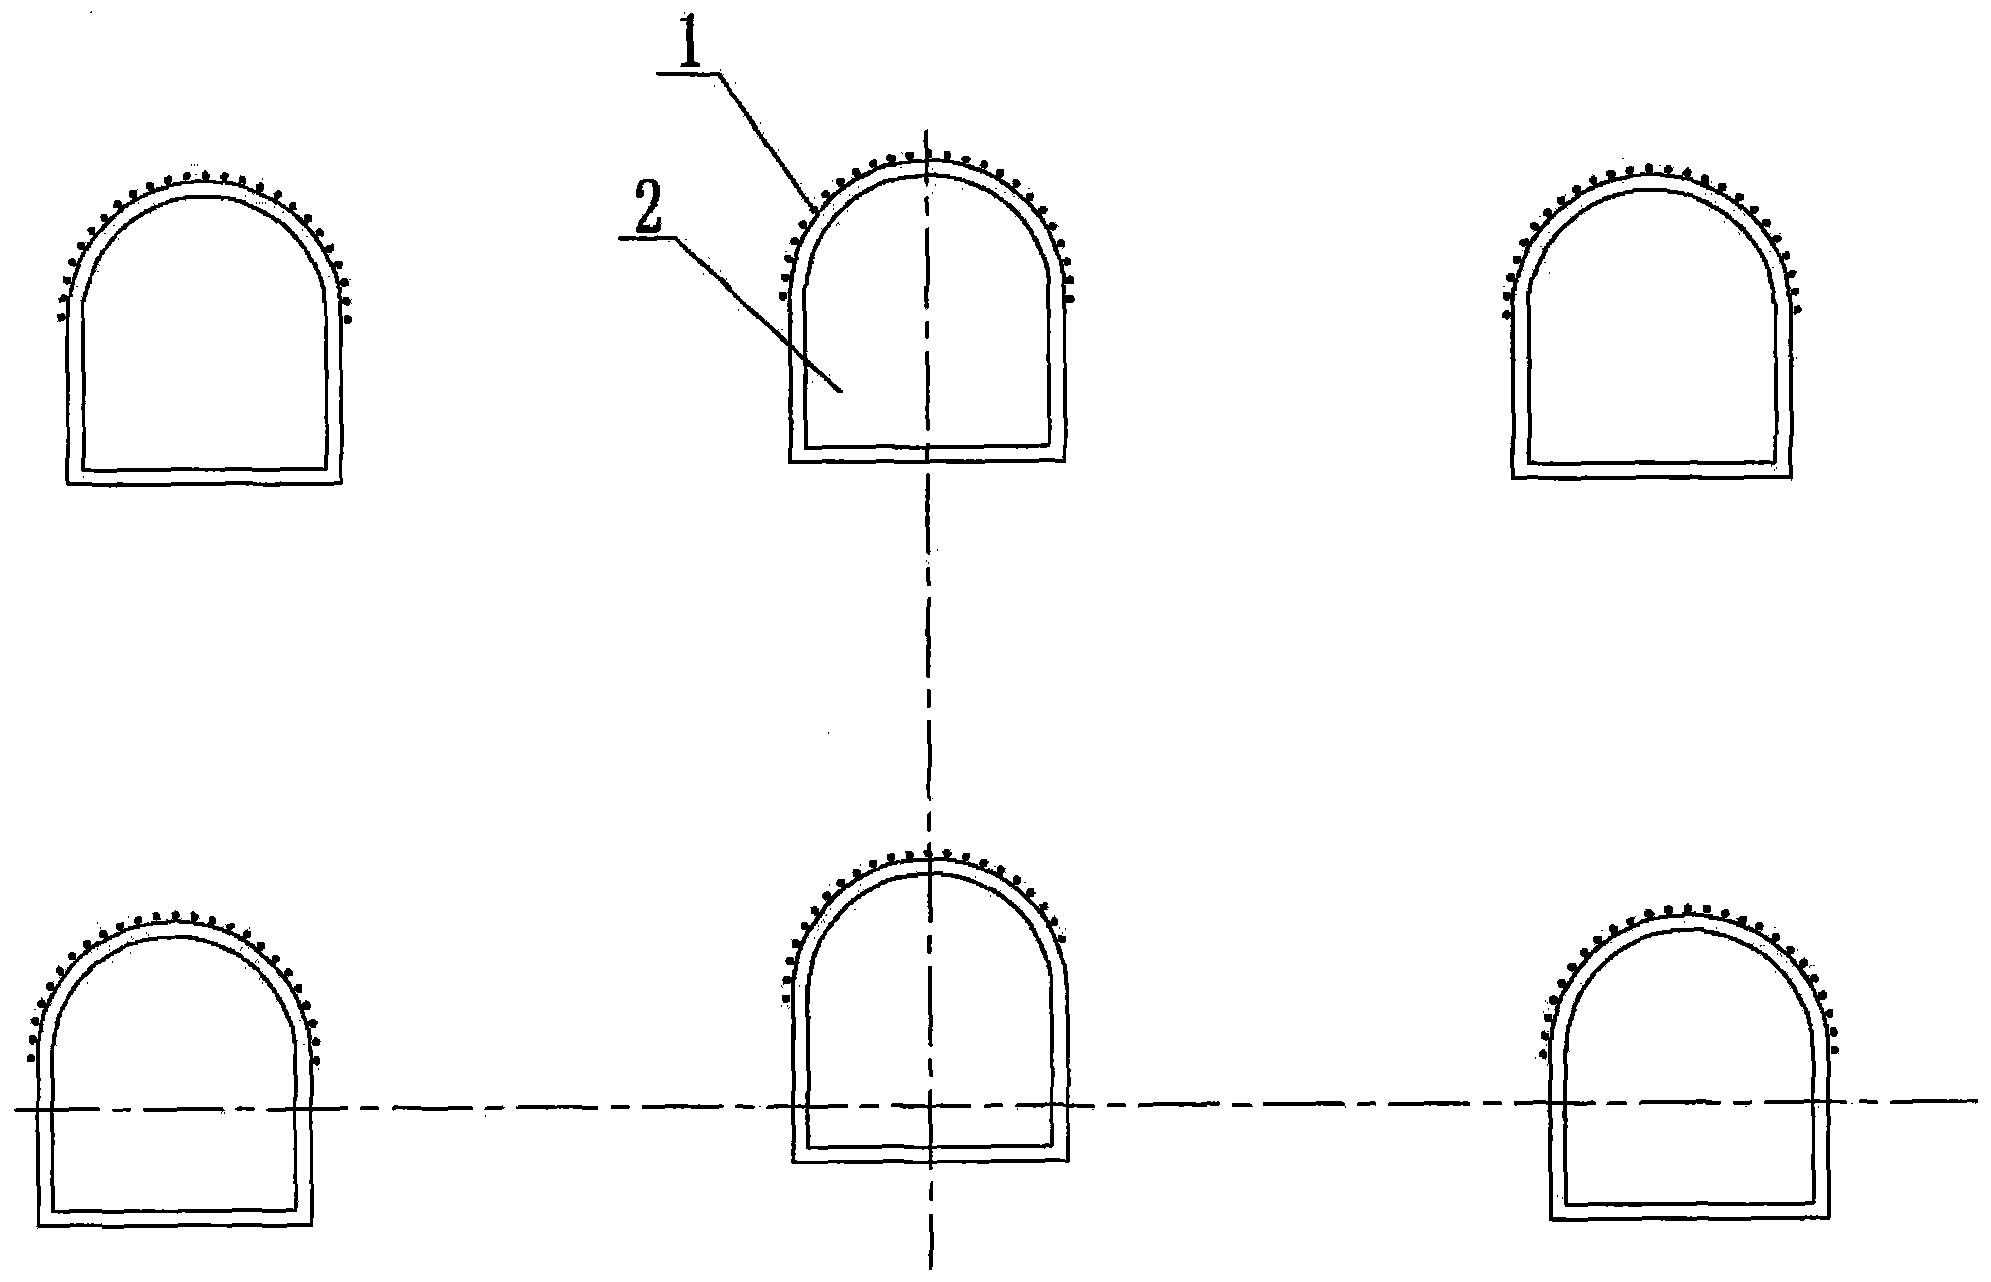 Construction method for subway station body